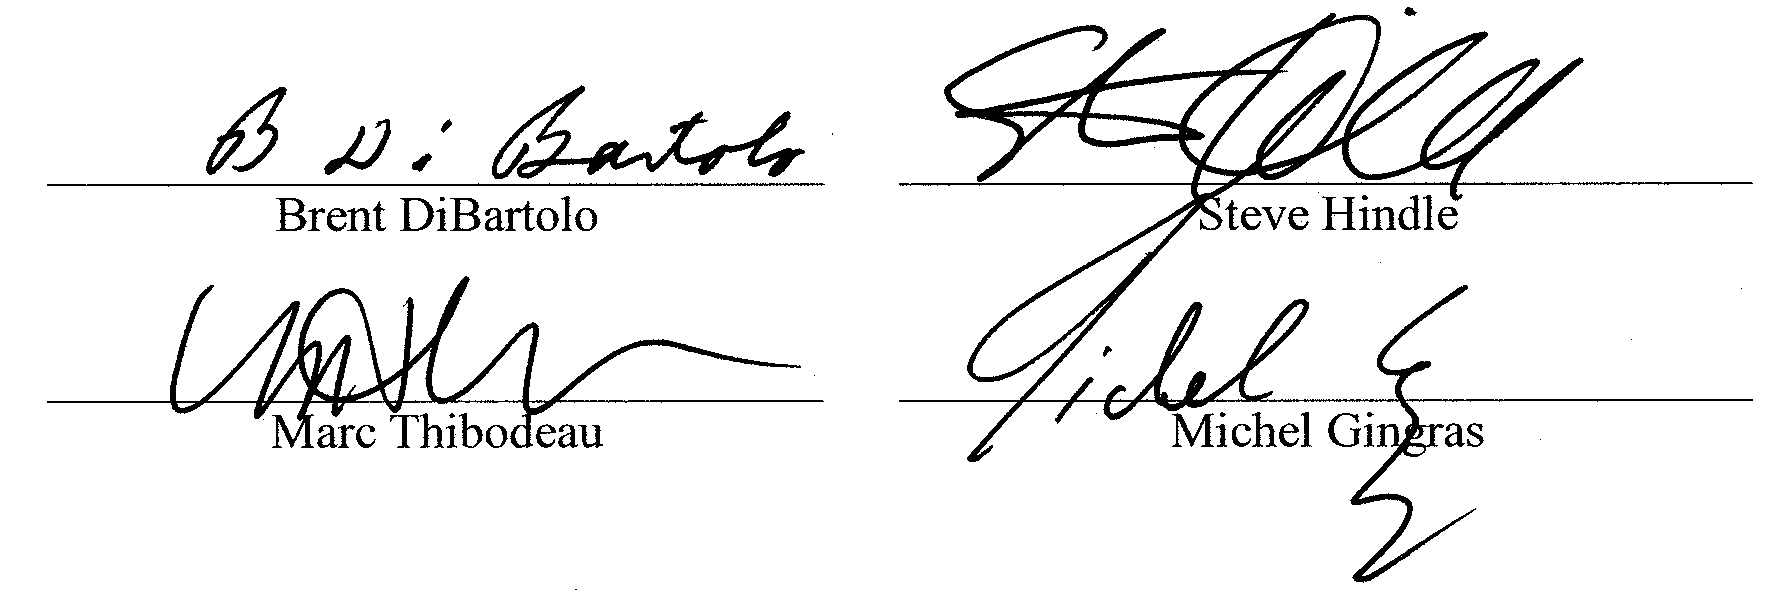 Signature Page - Appendix "G" - ASE Agreement